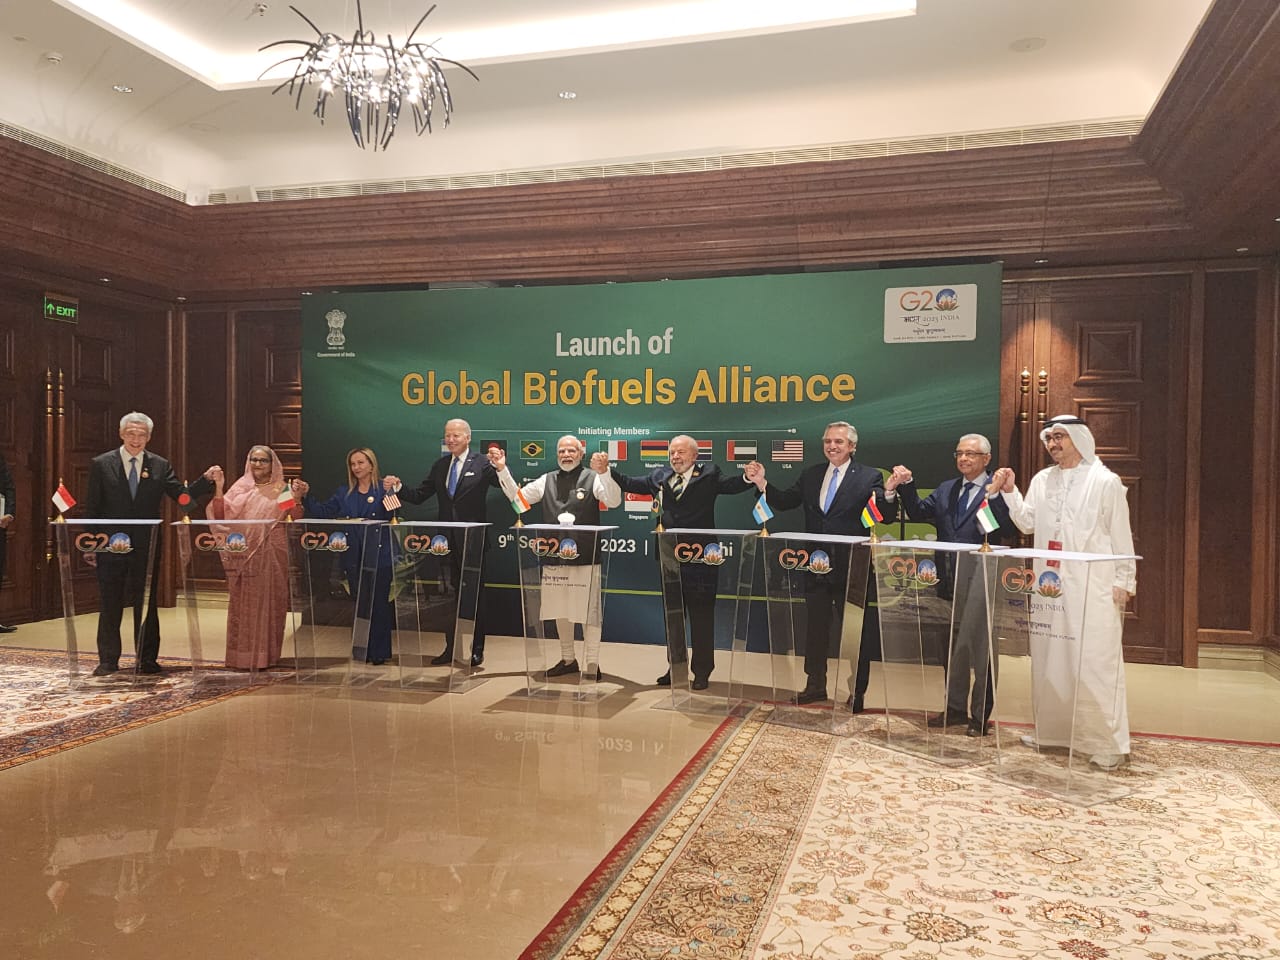 Source: PIB - Historic Moment in Global Energy Sector Global Biofuels Alliance (GBA) Announced at G20 Event